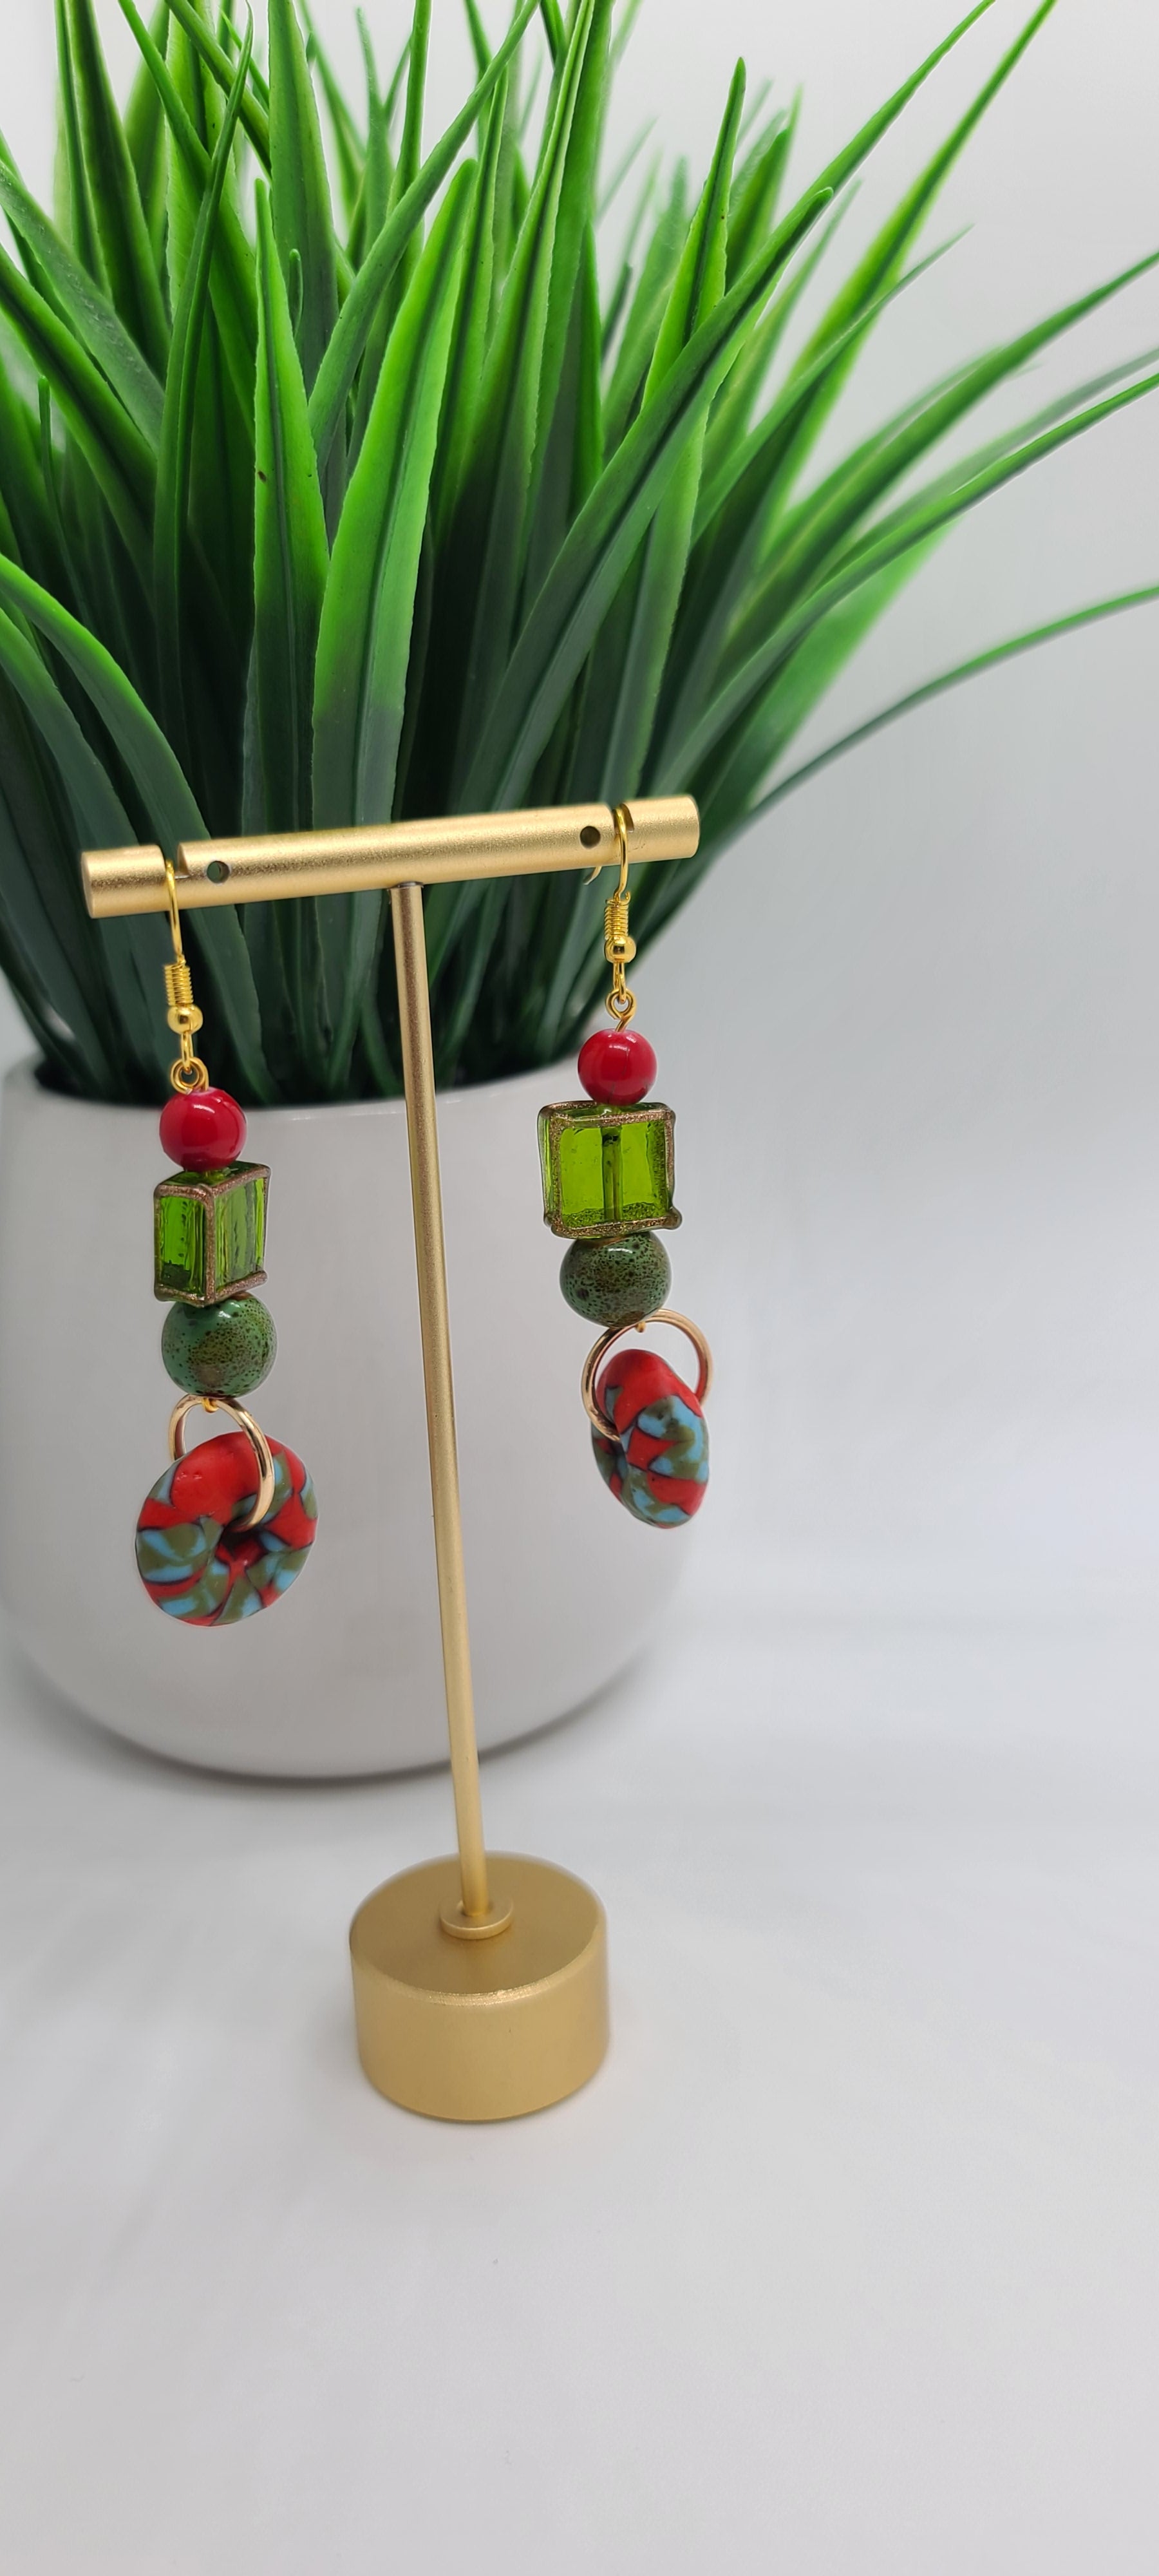 Length: 3 inches | Weight: 0.7 ounces  Distinctly You! These earrings are made with red and green Ashanti glass saucers, 12mm green ceramic stones, green and gold trim glass square box beads, 8mm red glass beads.